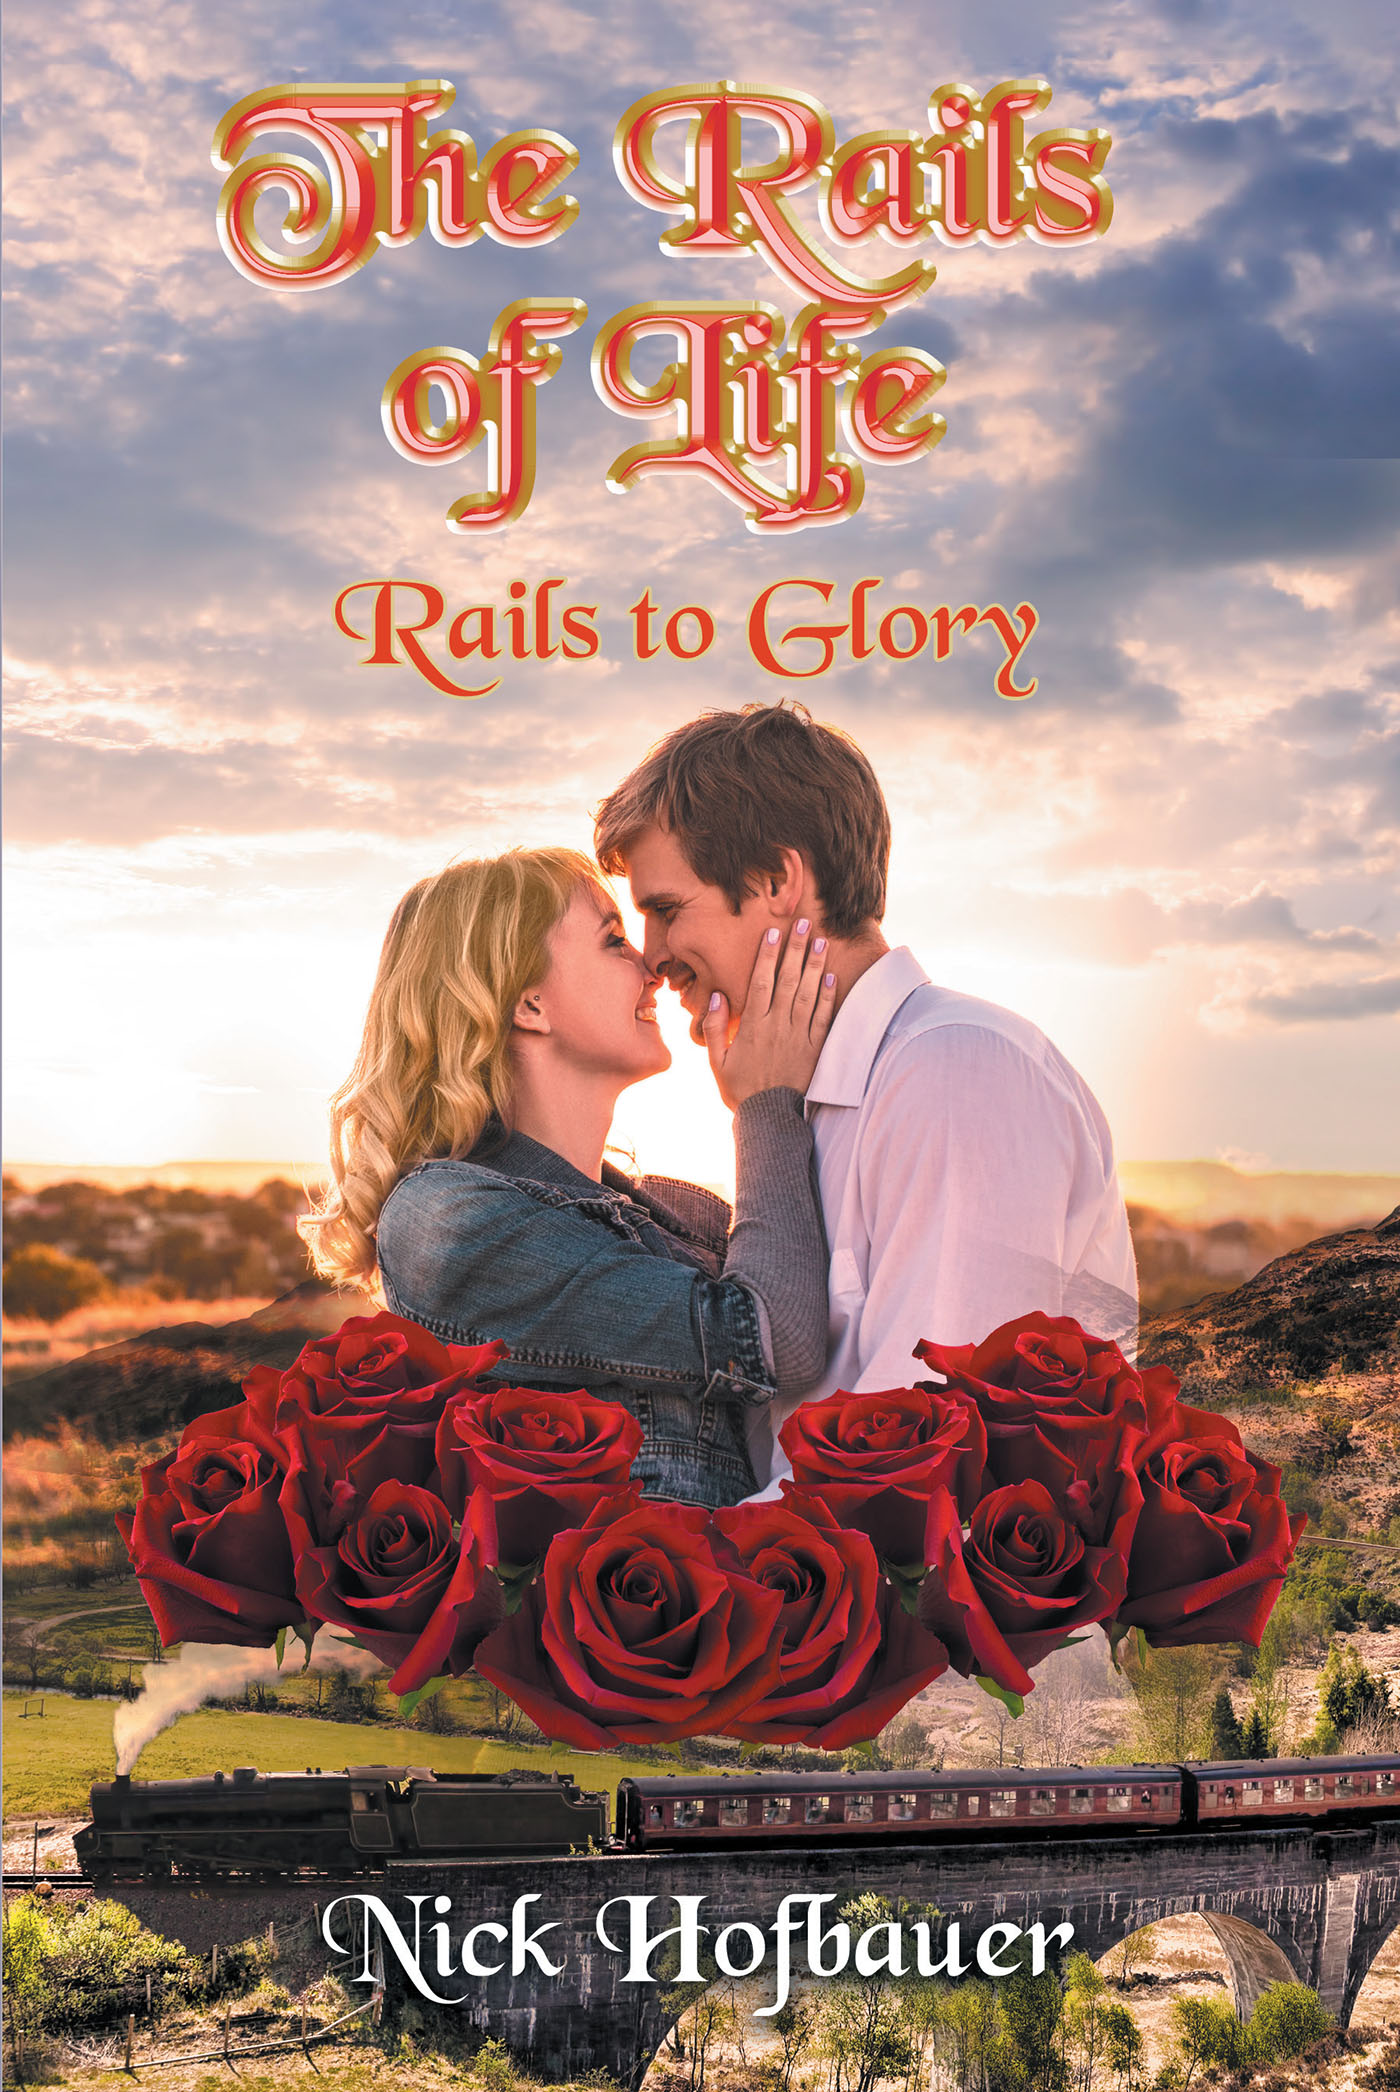 Author Nick Hofbauer’s New Book, "The Rails of Life: Rails to Glory," is the Story of Two People in the 1930s Who Bonded by the Railroad and Their Eternal Love